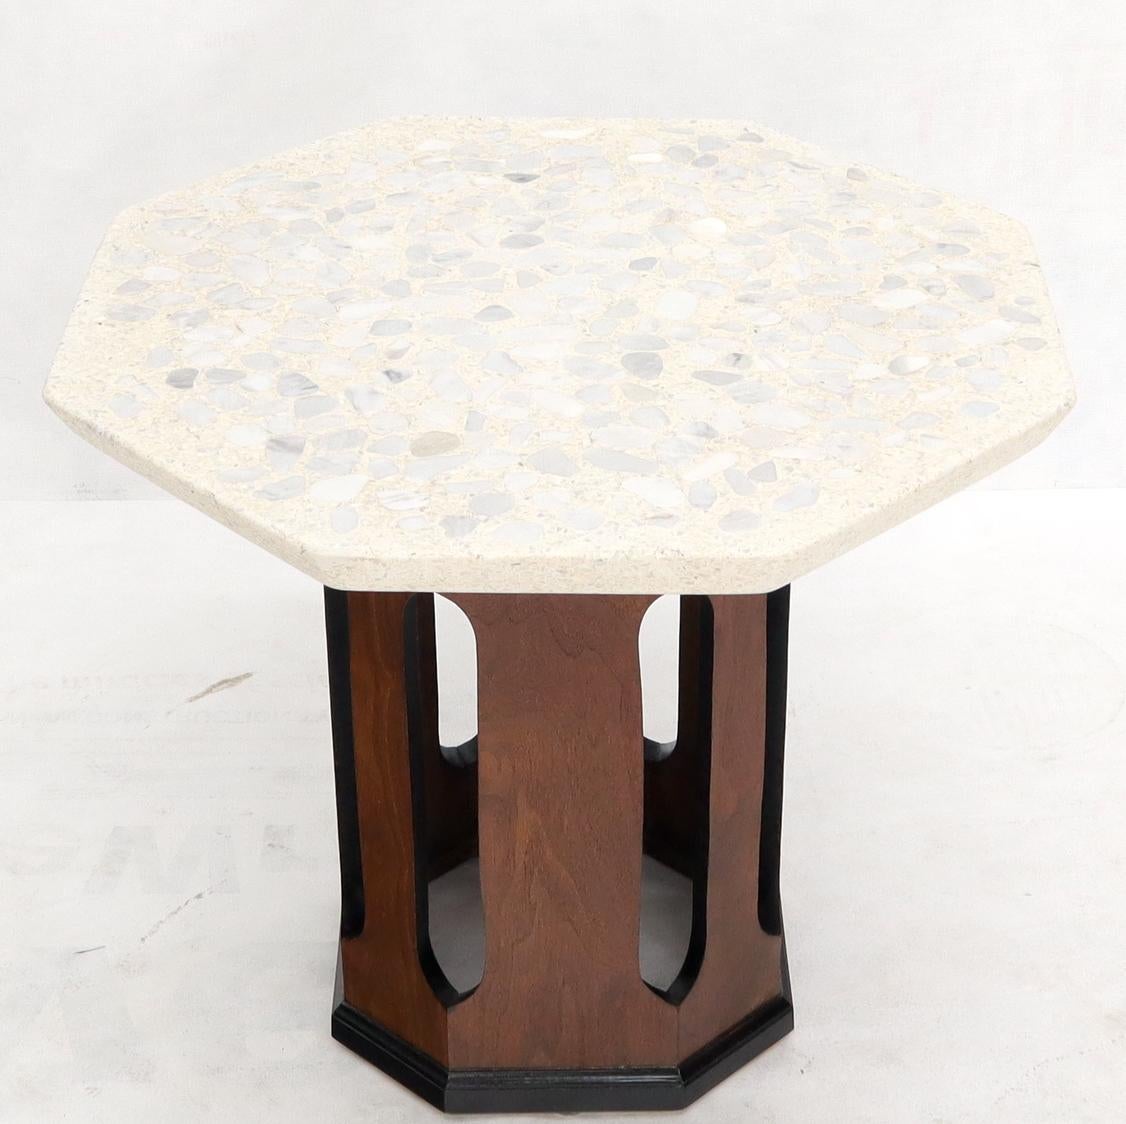 Octagon Terrazzo Top Walnut Base Side Occasional End Table Stand In Good Condition For Sale In Rockaway, NJ